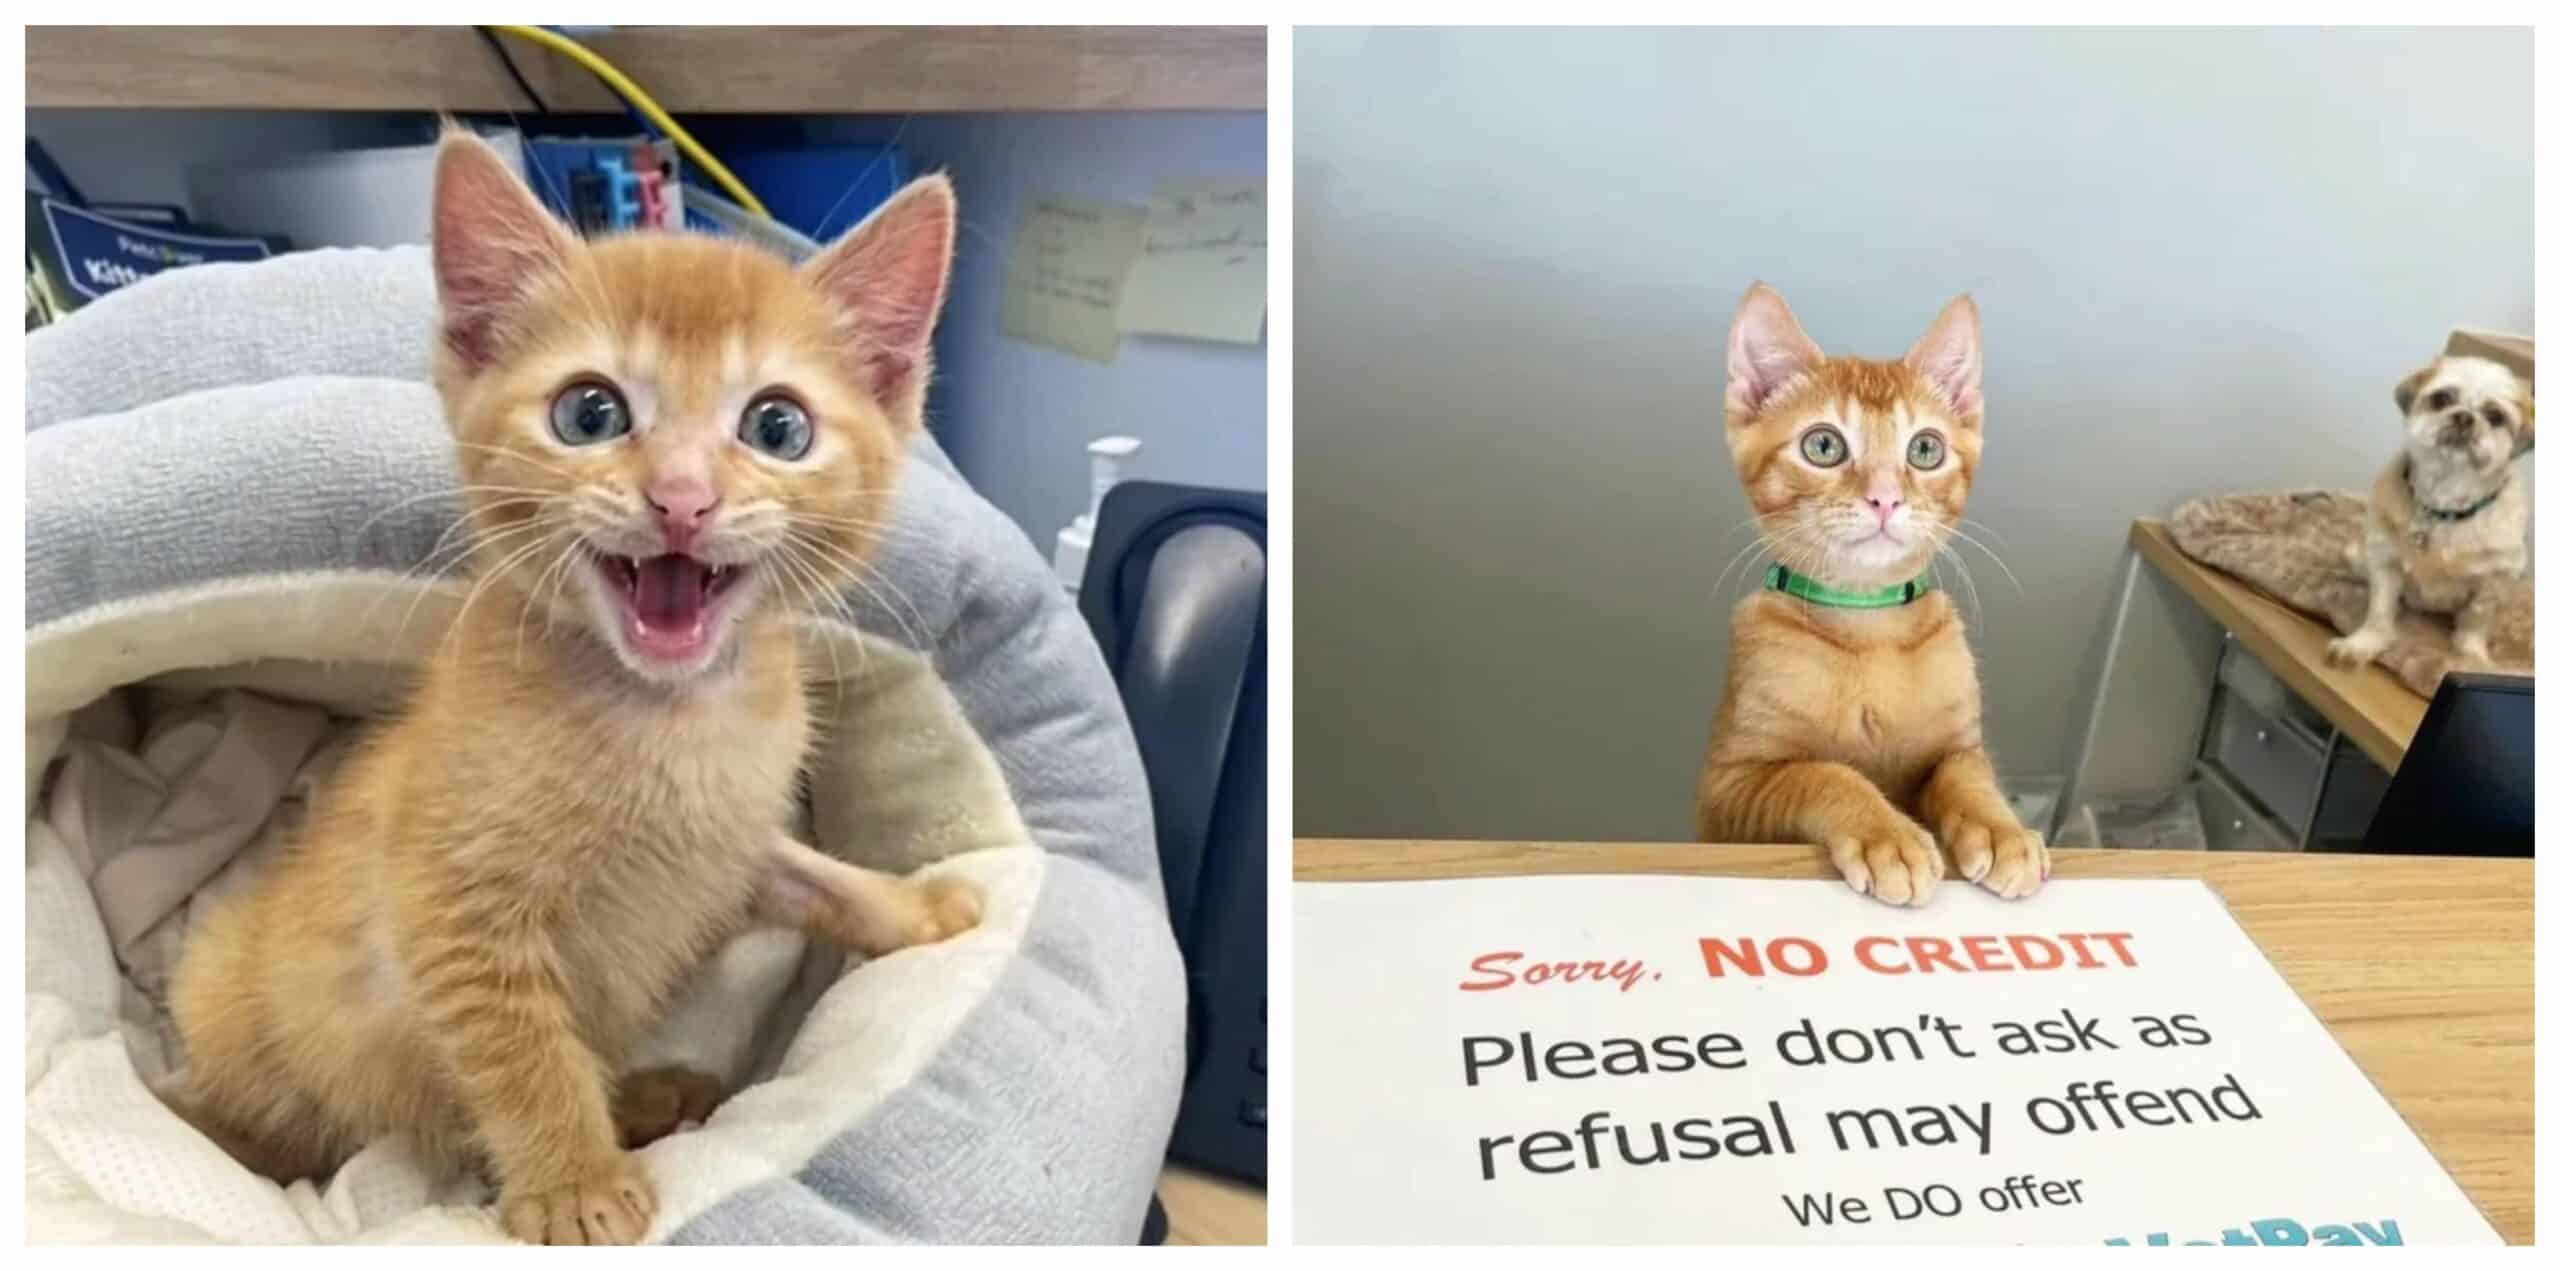 Kitten seeks help at the veterinarian’s clinic but ends up taking charge of the facility